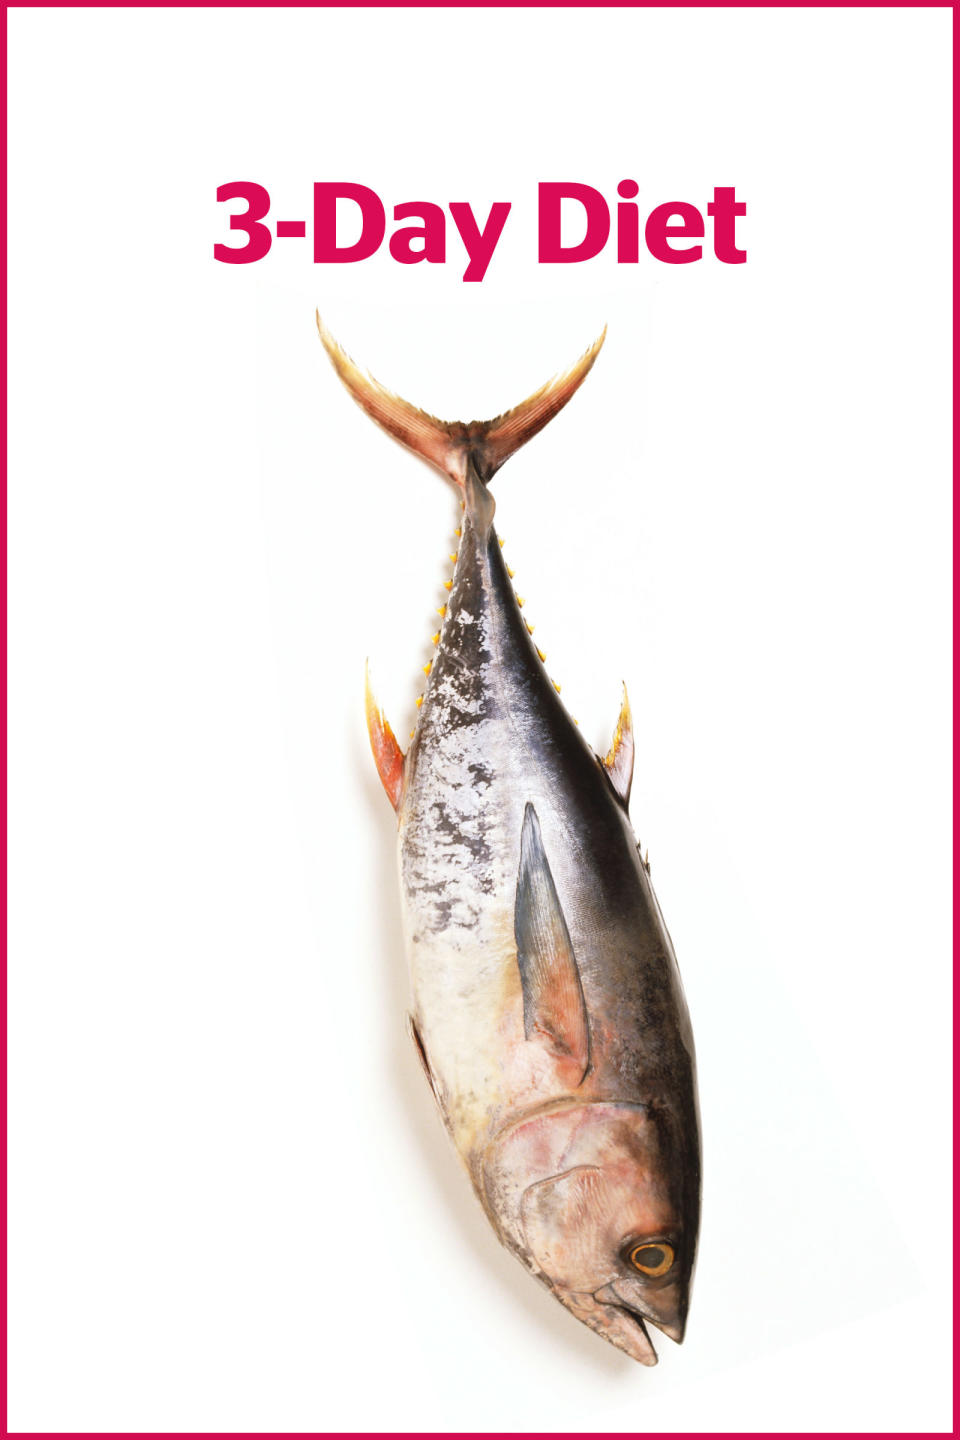 22) The 3-Day Diet is Just Plain Boring